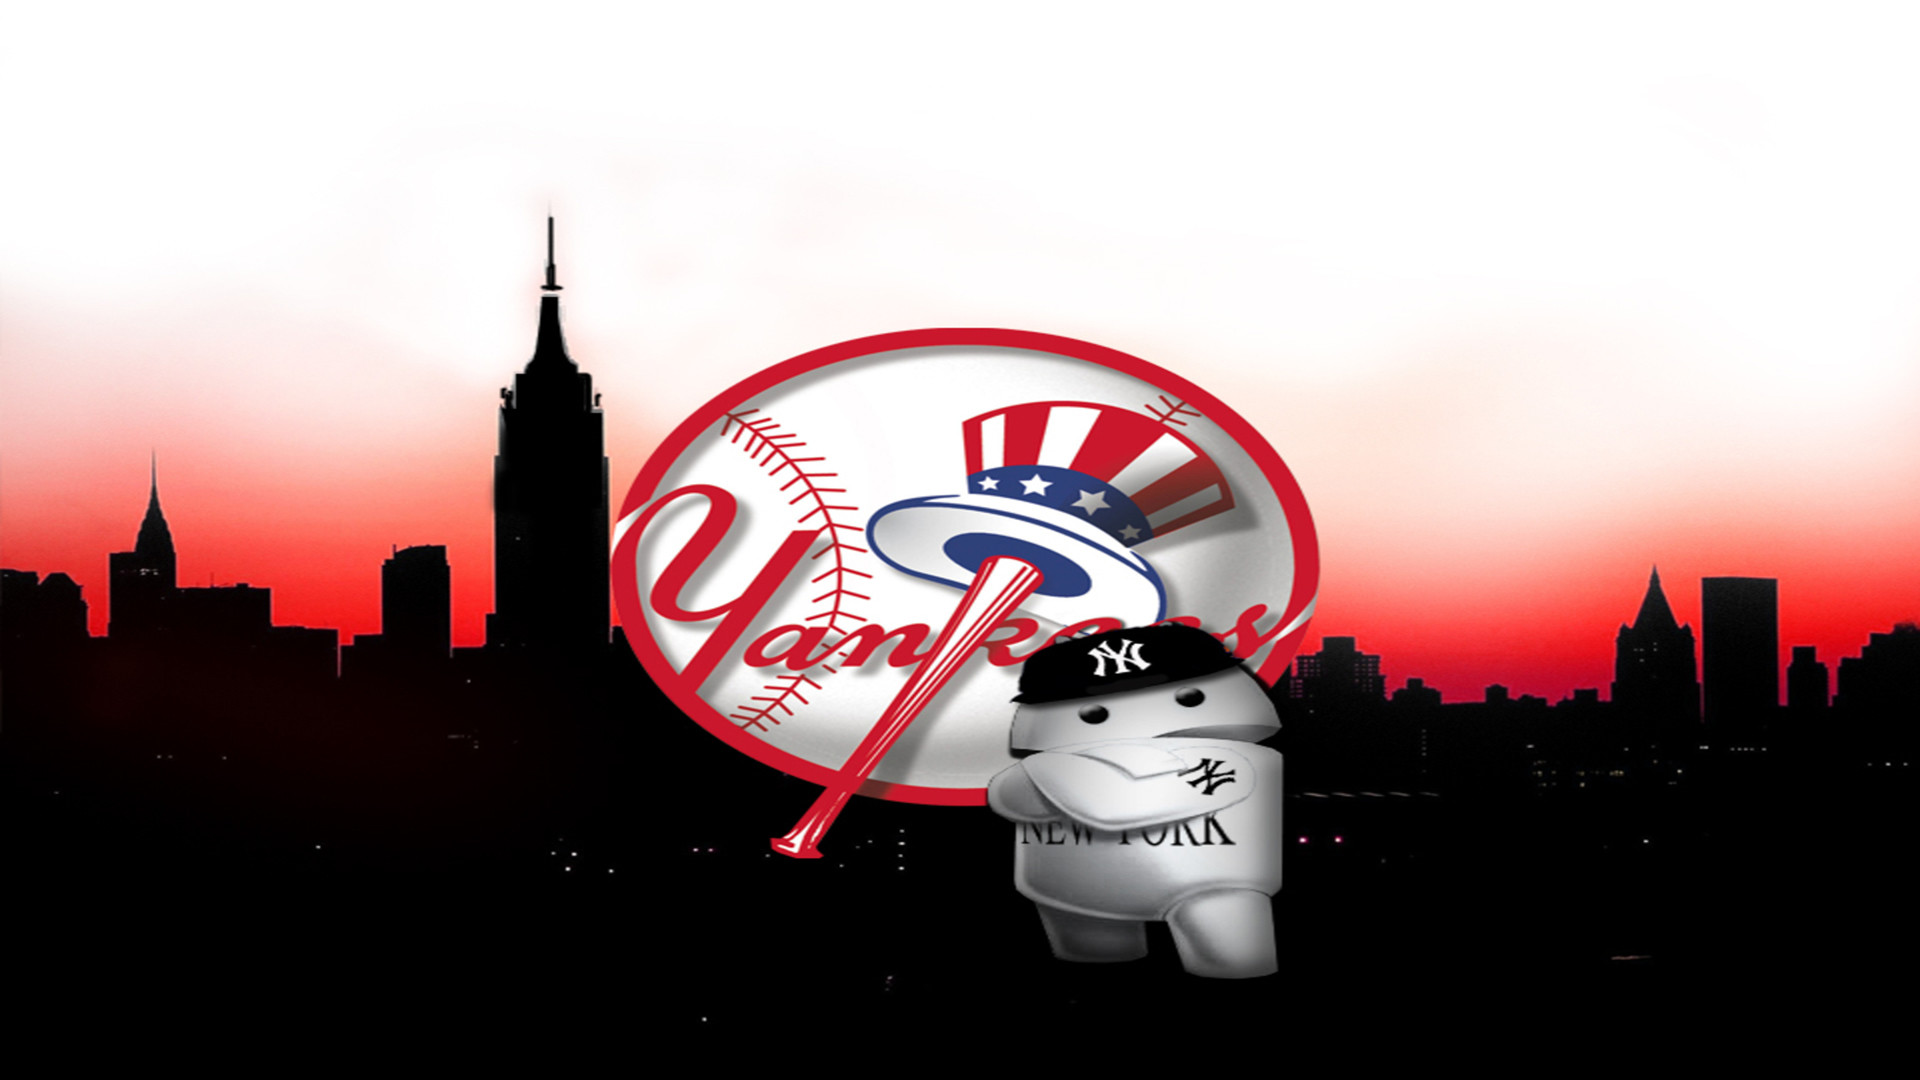 Stay reppin with these wallpapers   New York Yankees  Facebook